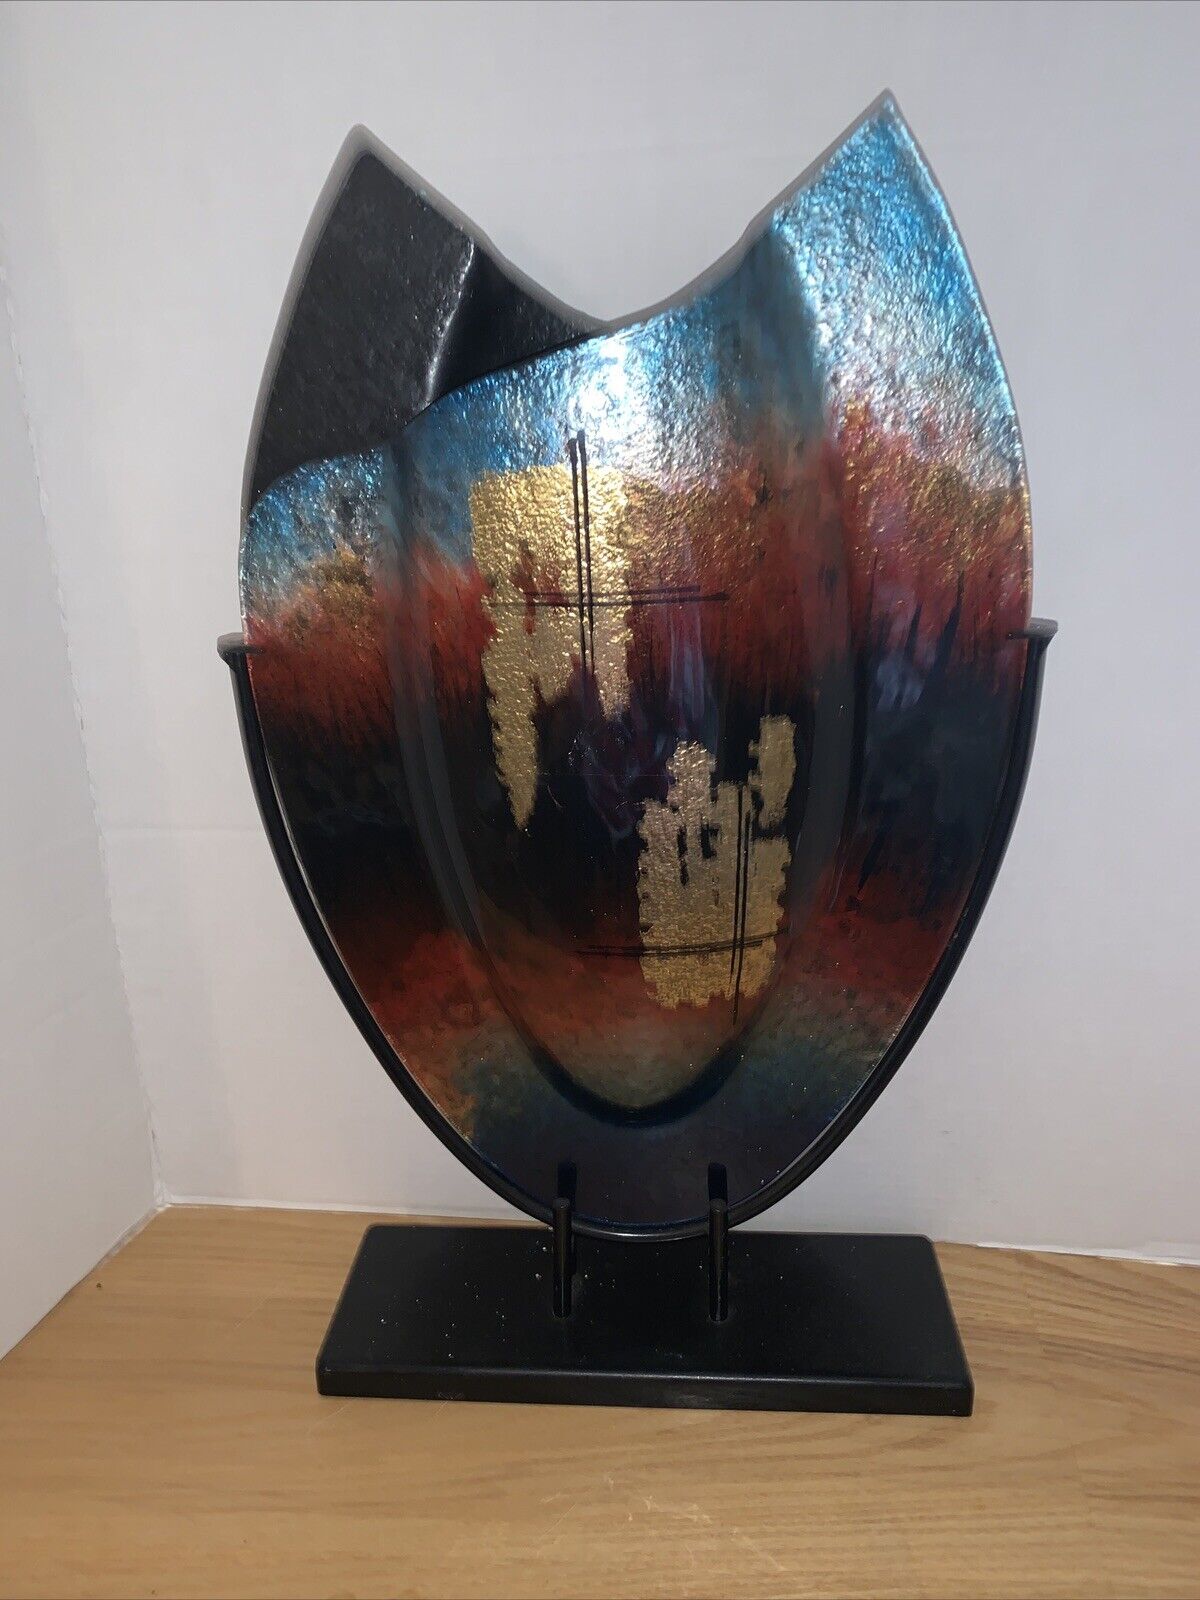 Deco/metal/glass Vase Art For Office Or Home With Stand Fused Glass Or Metal??